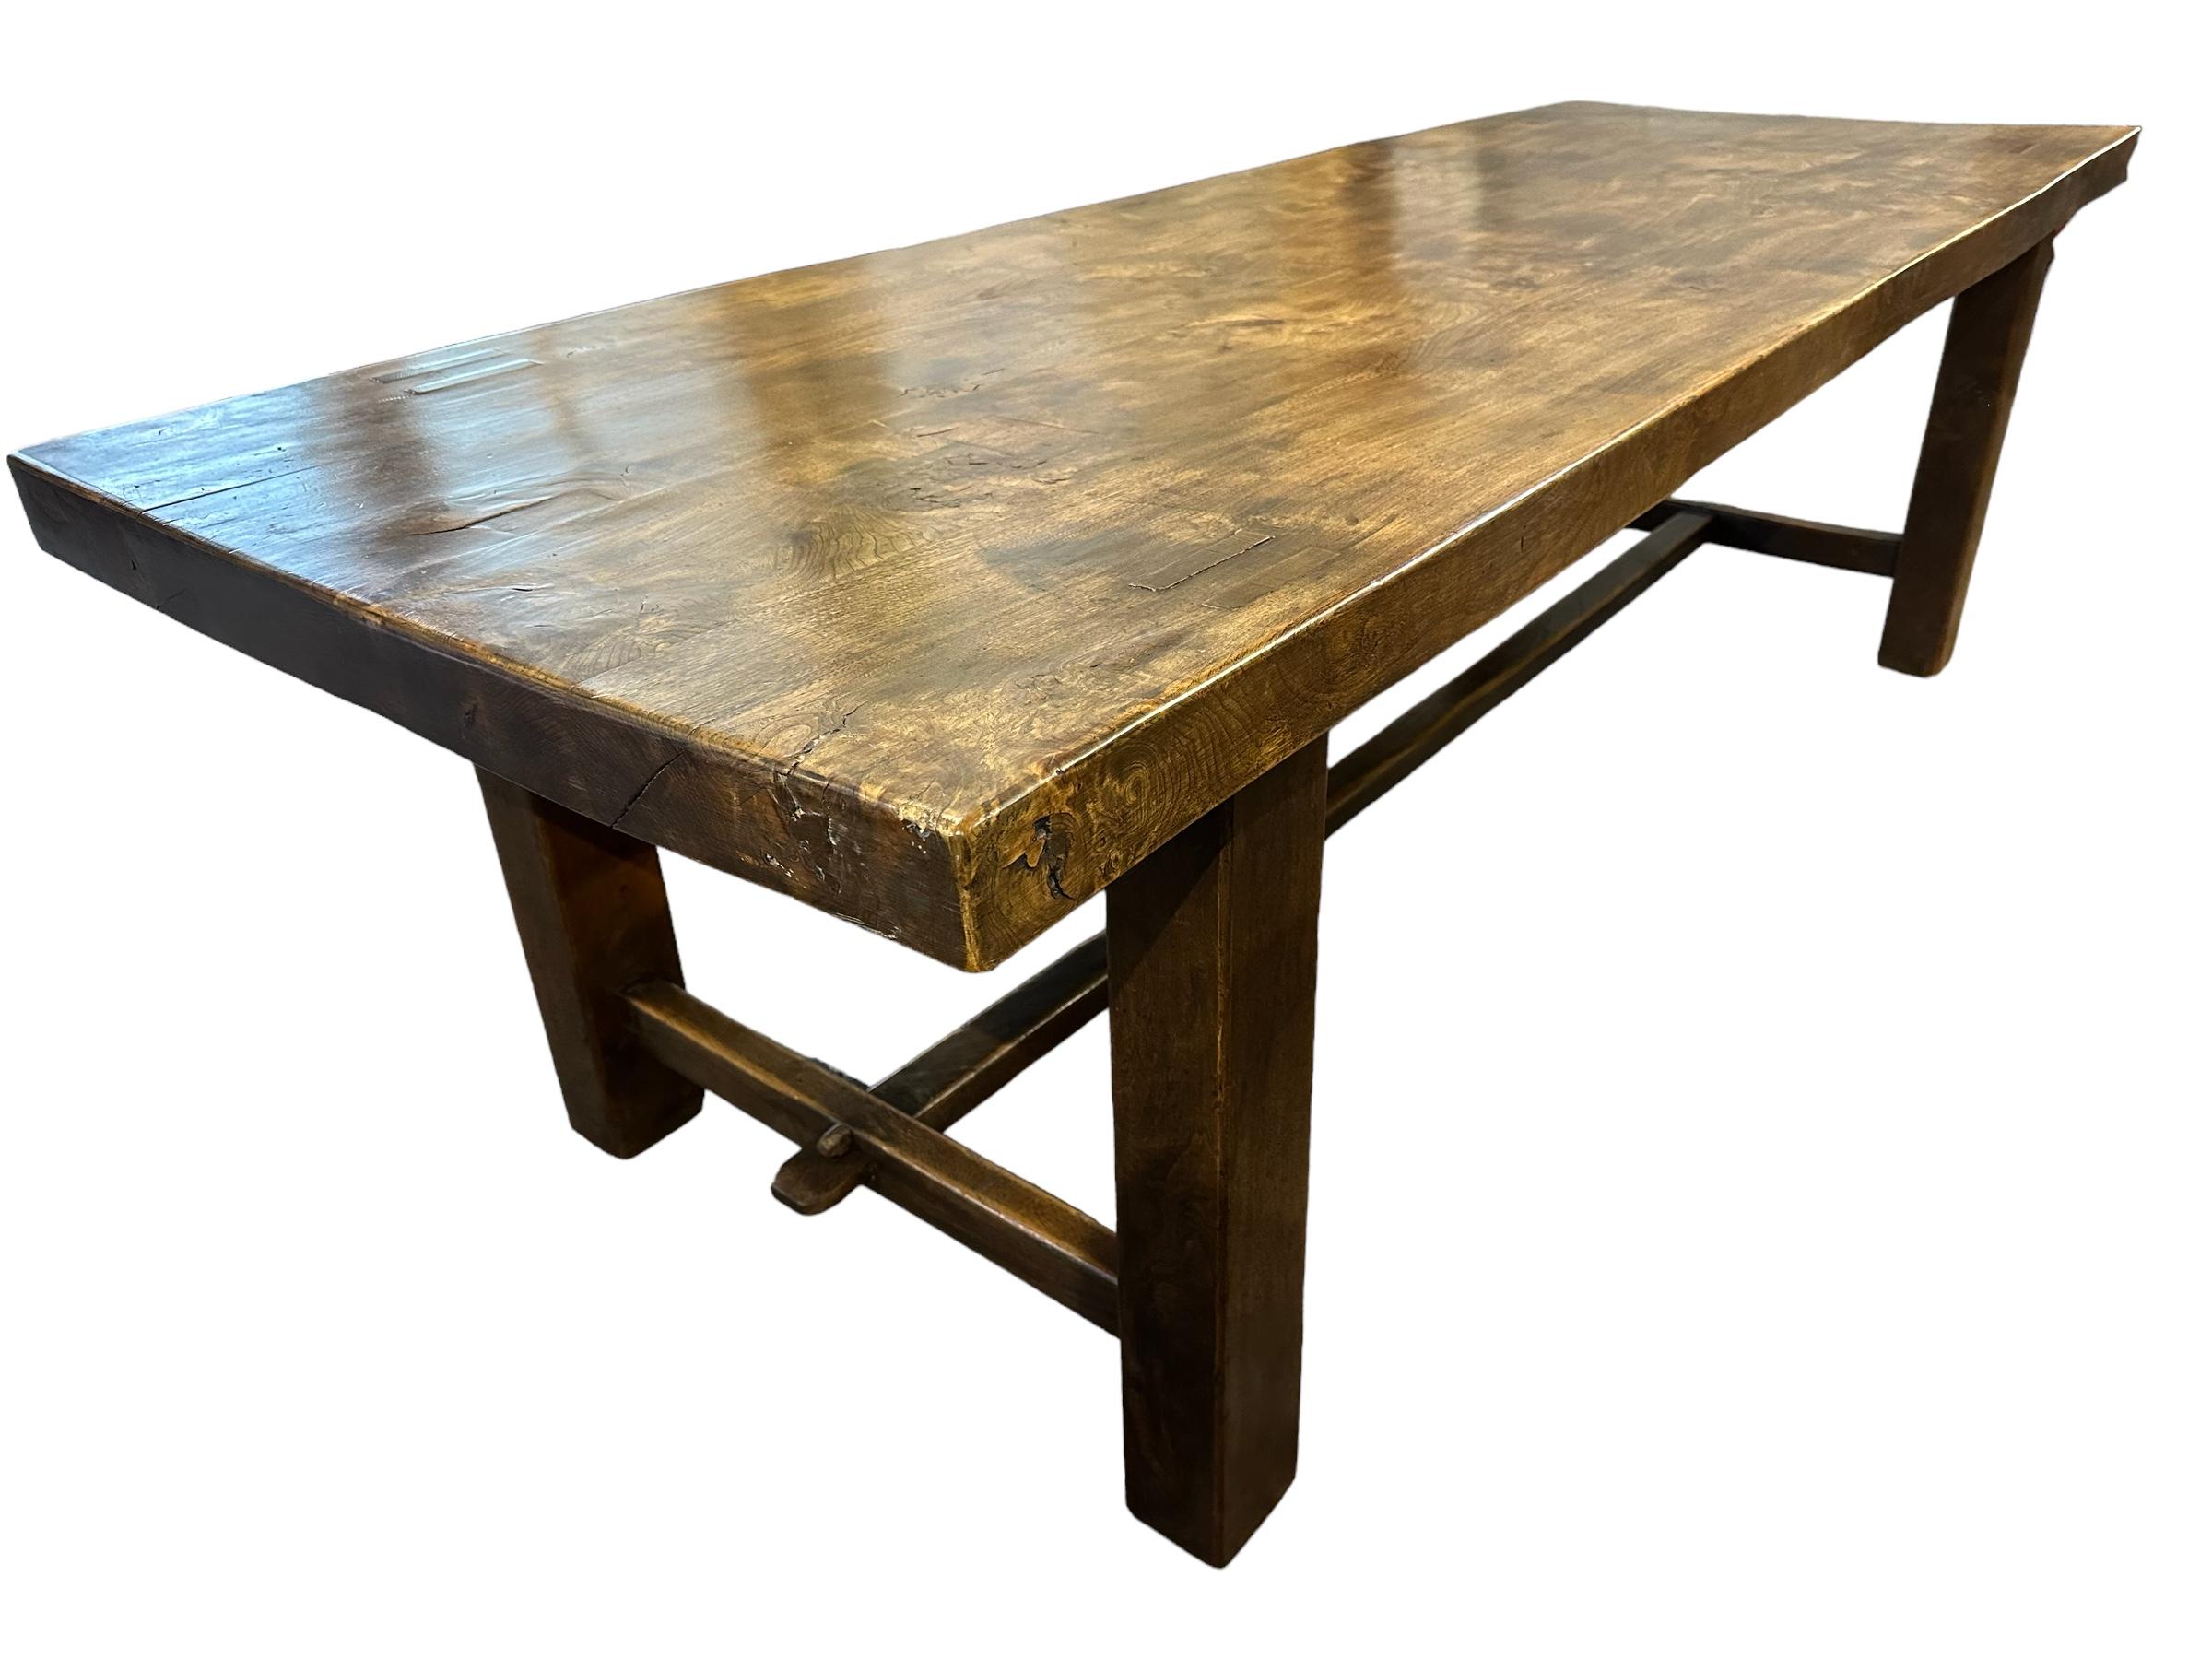 The vintage French elm Normandy table is a great example of a true Normandy table. The sturdy base and good proportions make it a desirable piece of furniture. the lovely dark elm with exquisite figuring on the top adds to its charm. The table